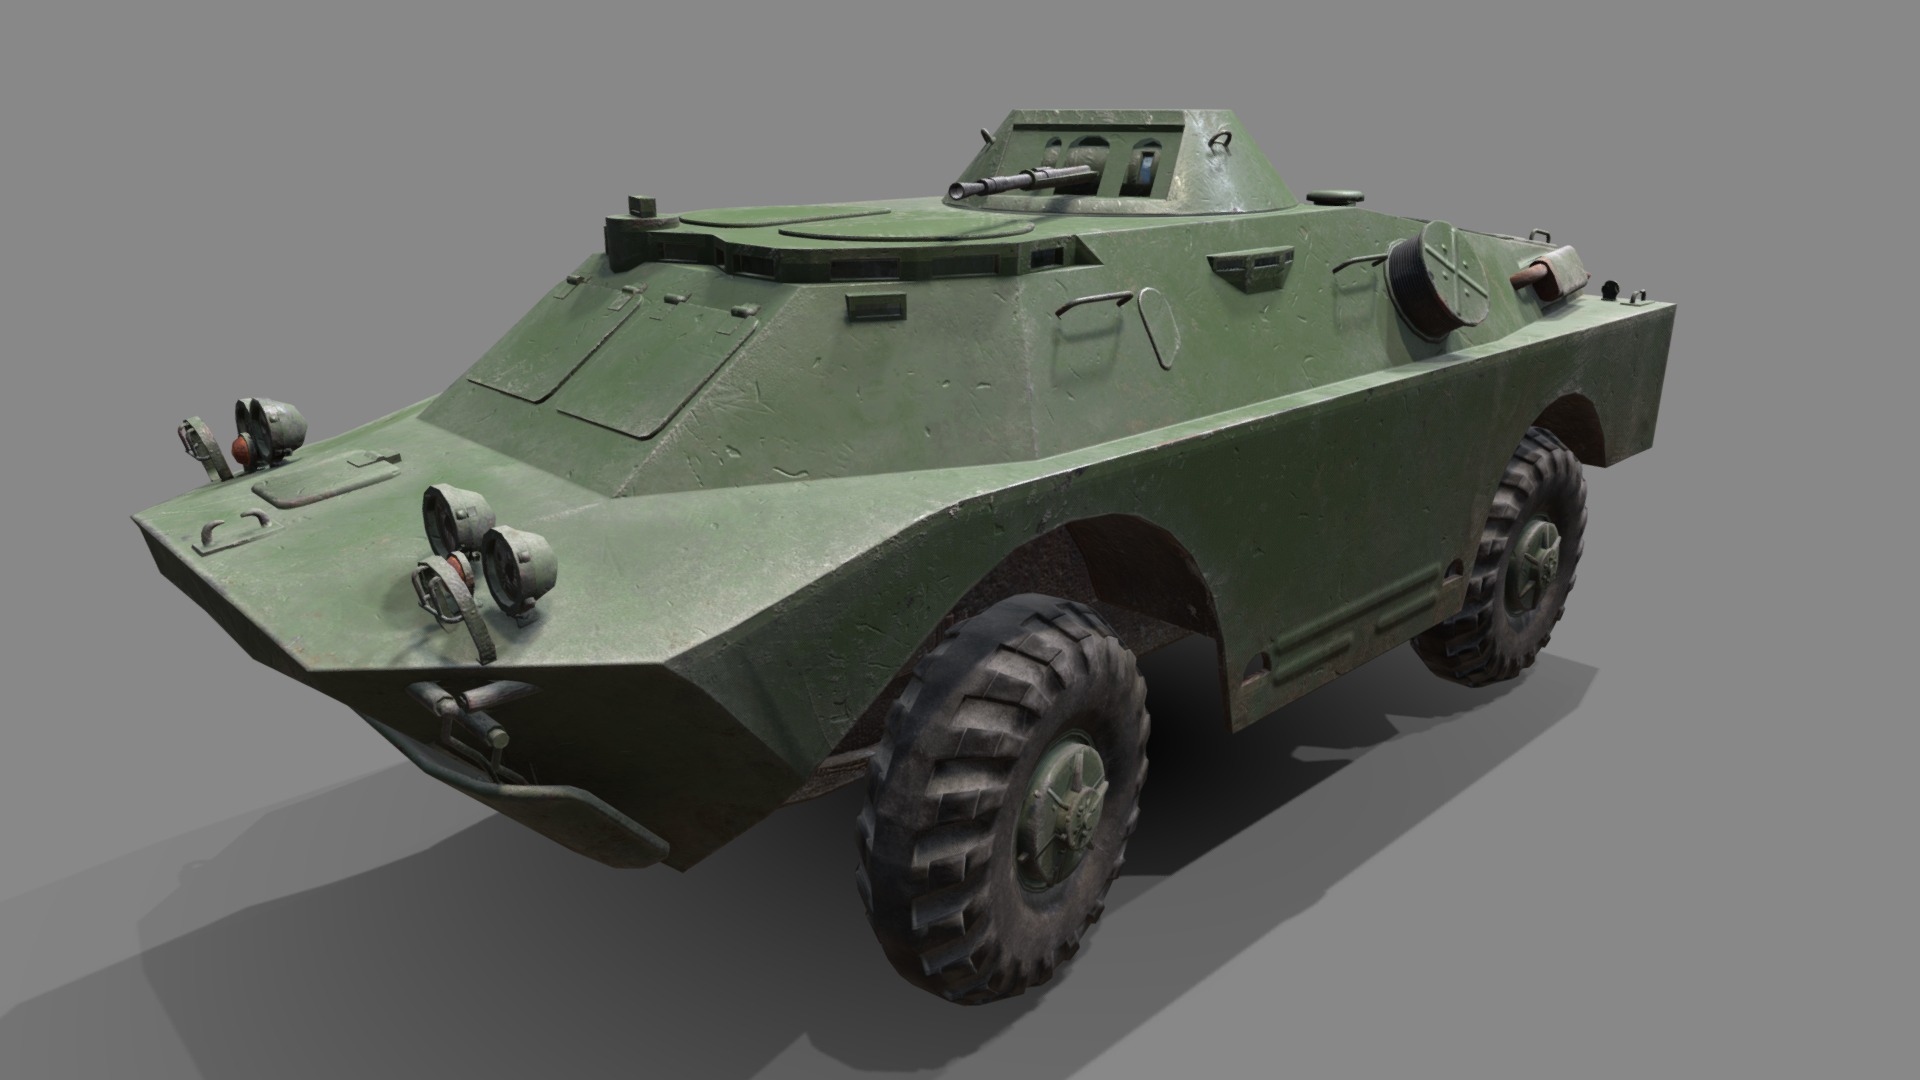 3D model Brdm2 low poly - This is a 3D model of the Brdm2 low poly. The 3D model is about a green military vehicle.